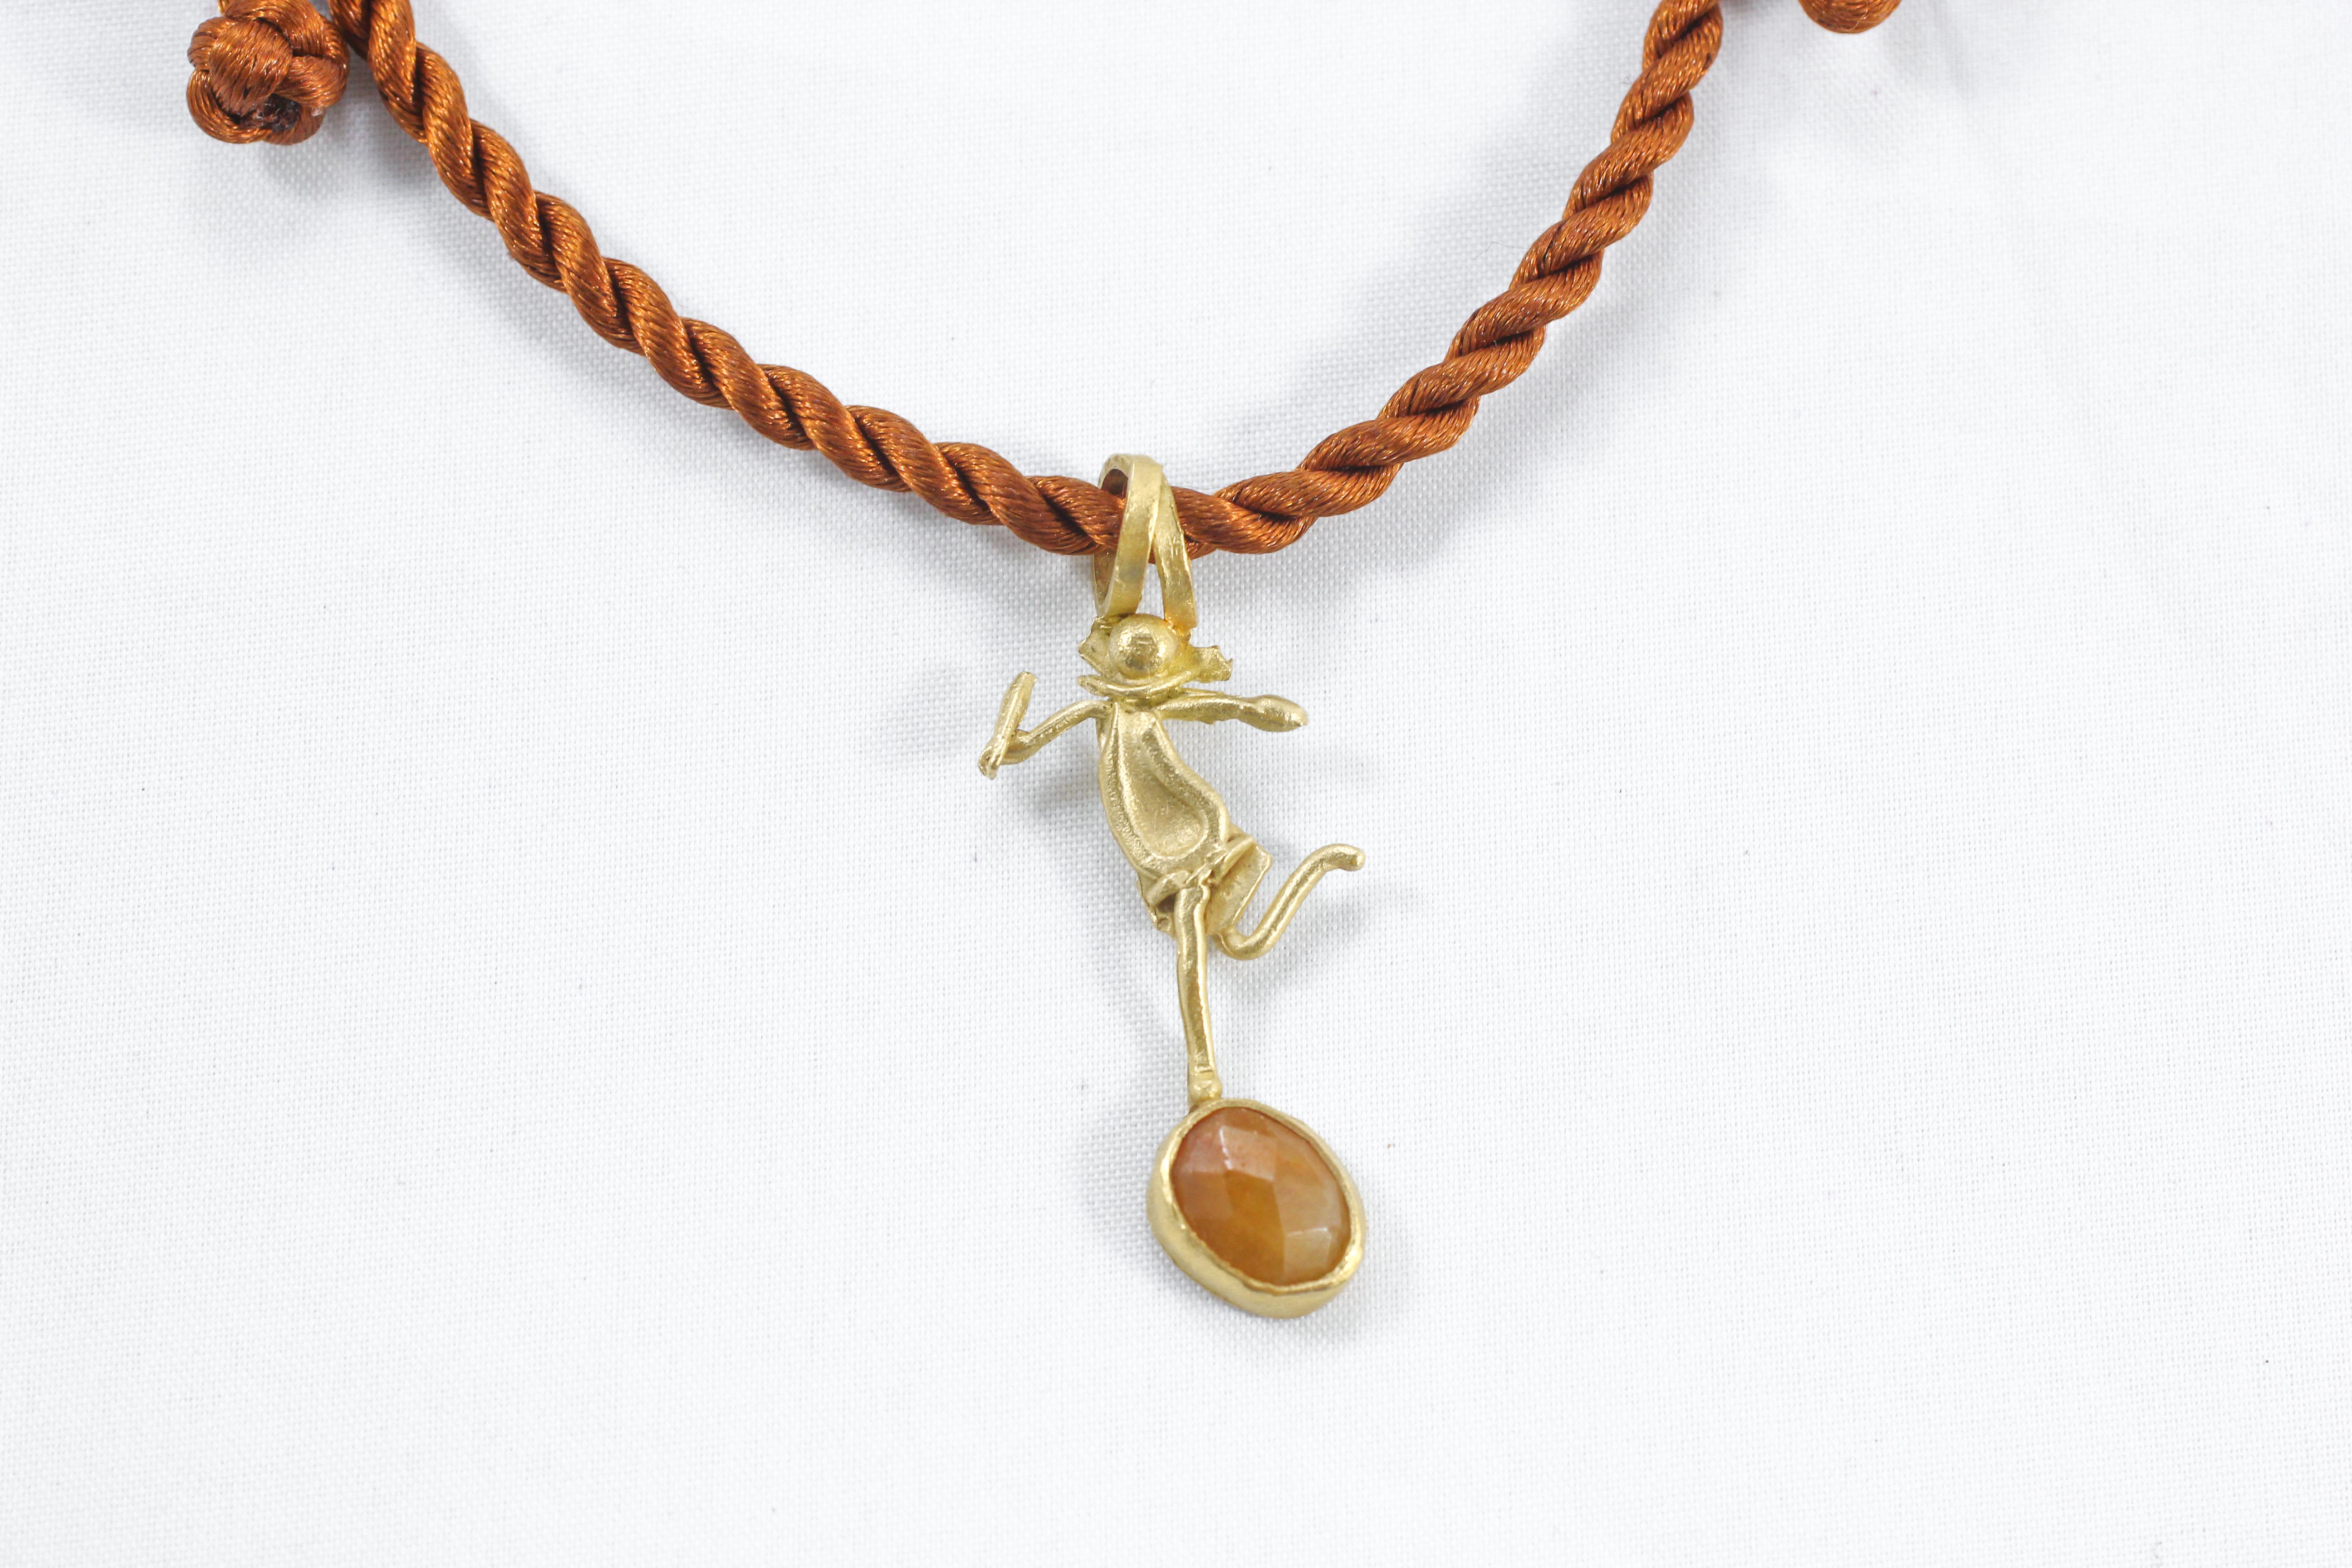 DANCE, figurine pendant necklace. Whimsical, modernist style, minimalist sculpture pendant will arrive with a silk cord. Created for a modern woman. Also pictured together with He pendant and a leather multi-strand necklace (all sold separately).